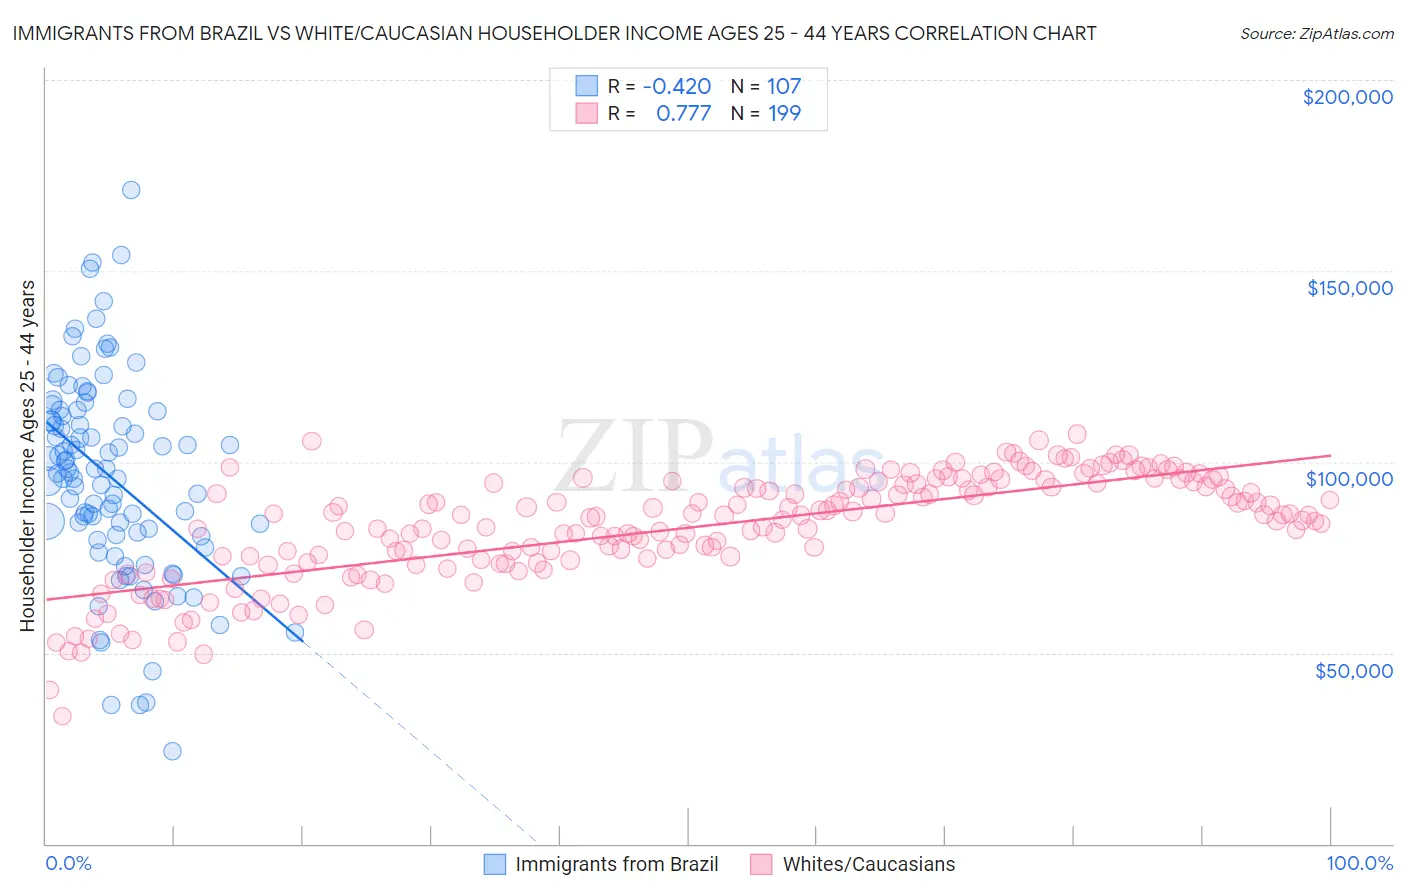 Immigrants from Brazil vs White/Caucasian Householder Income Ages 25 - 44 years